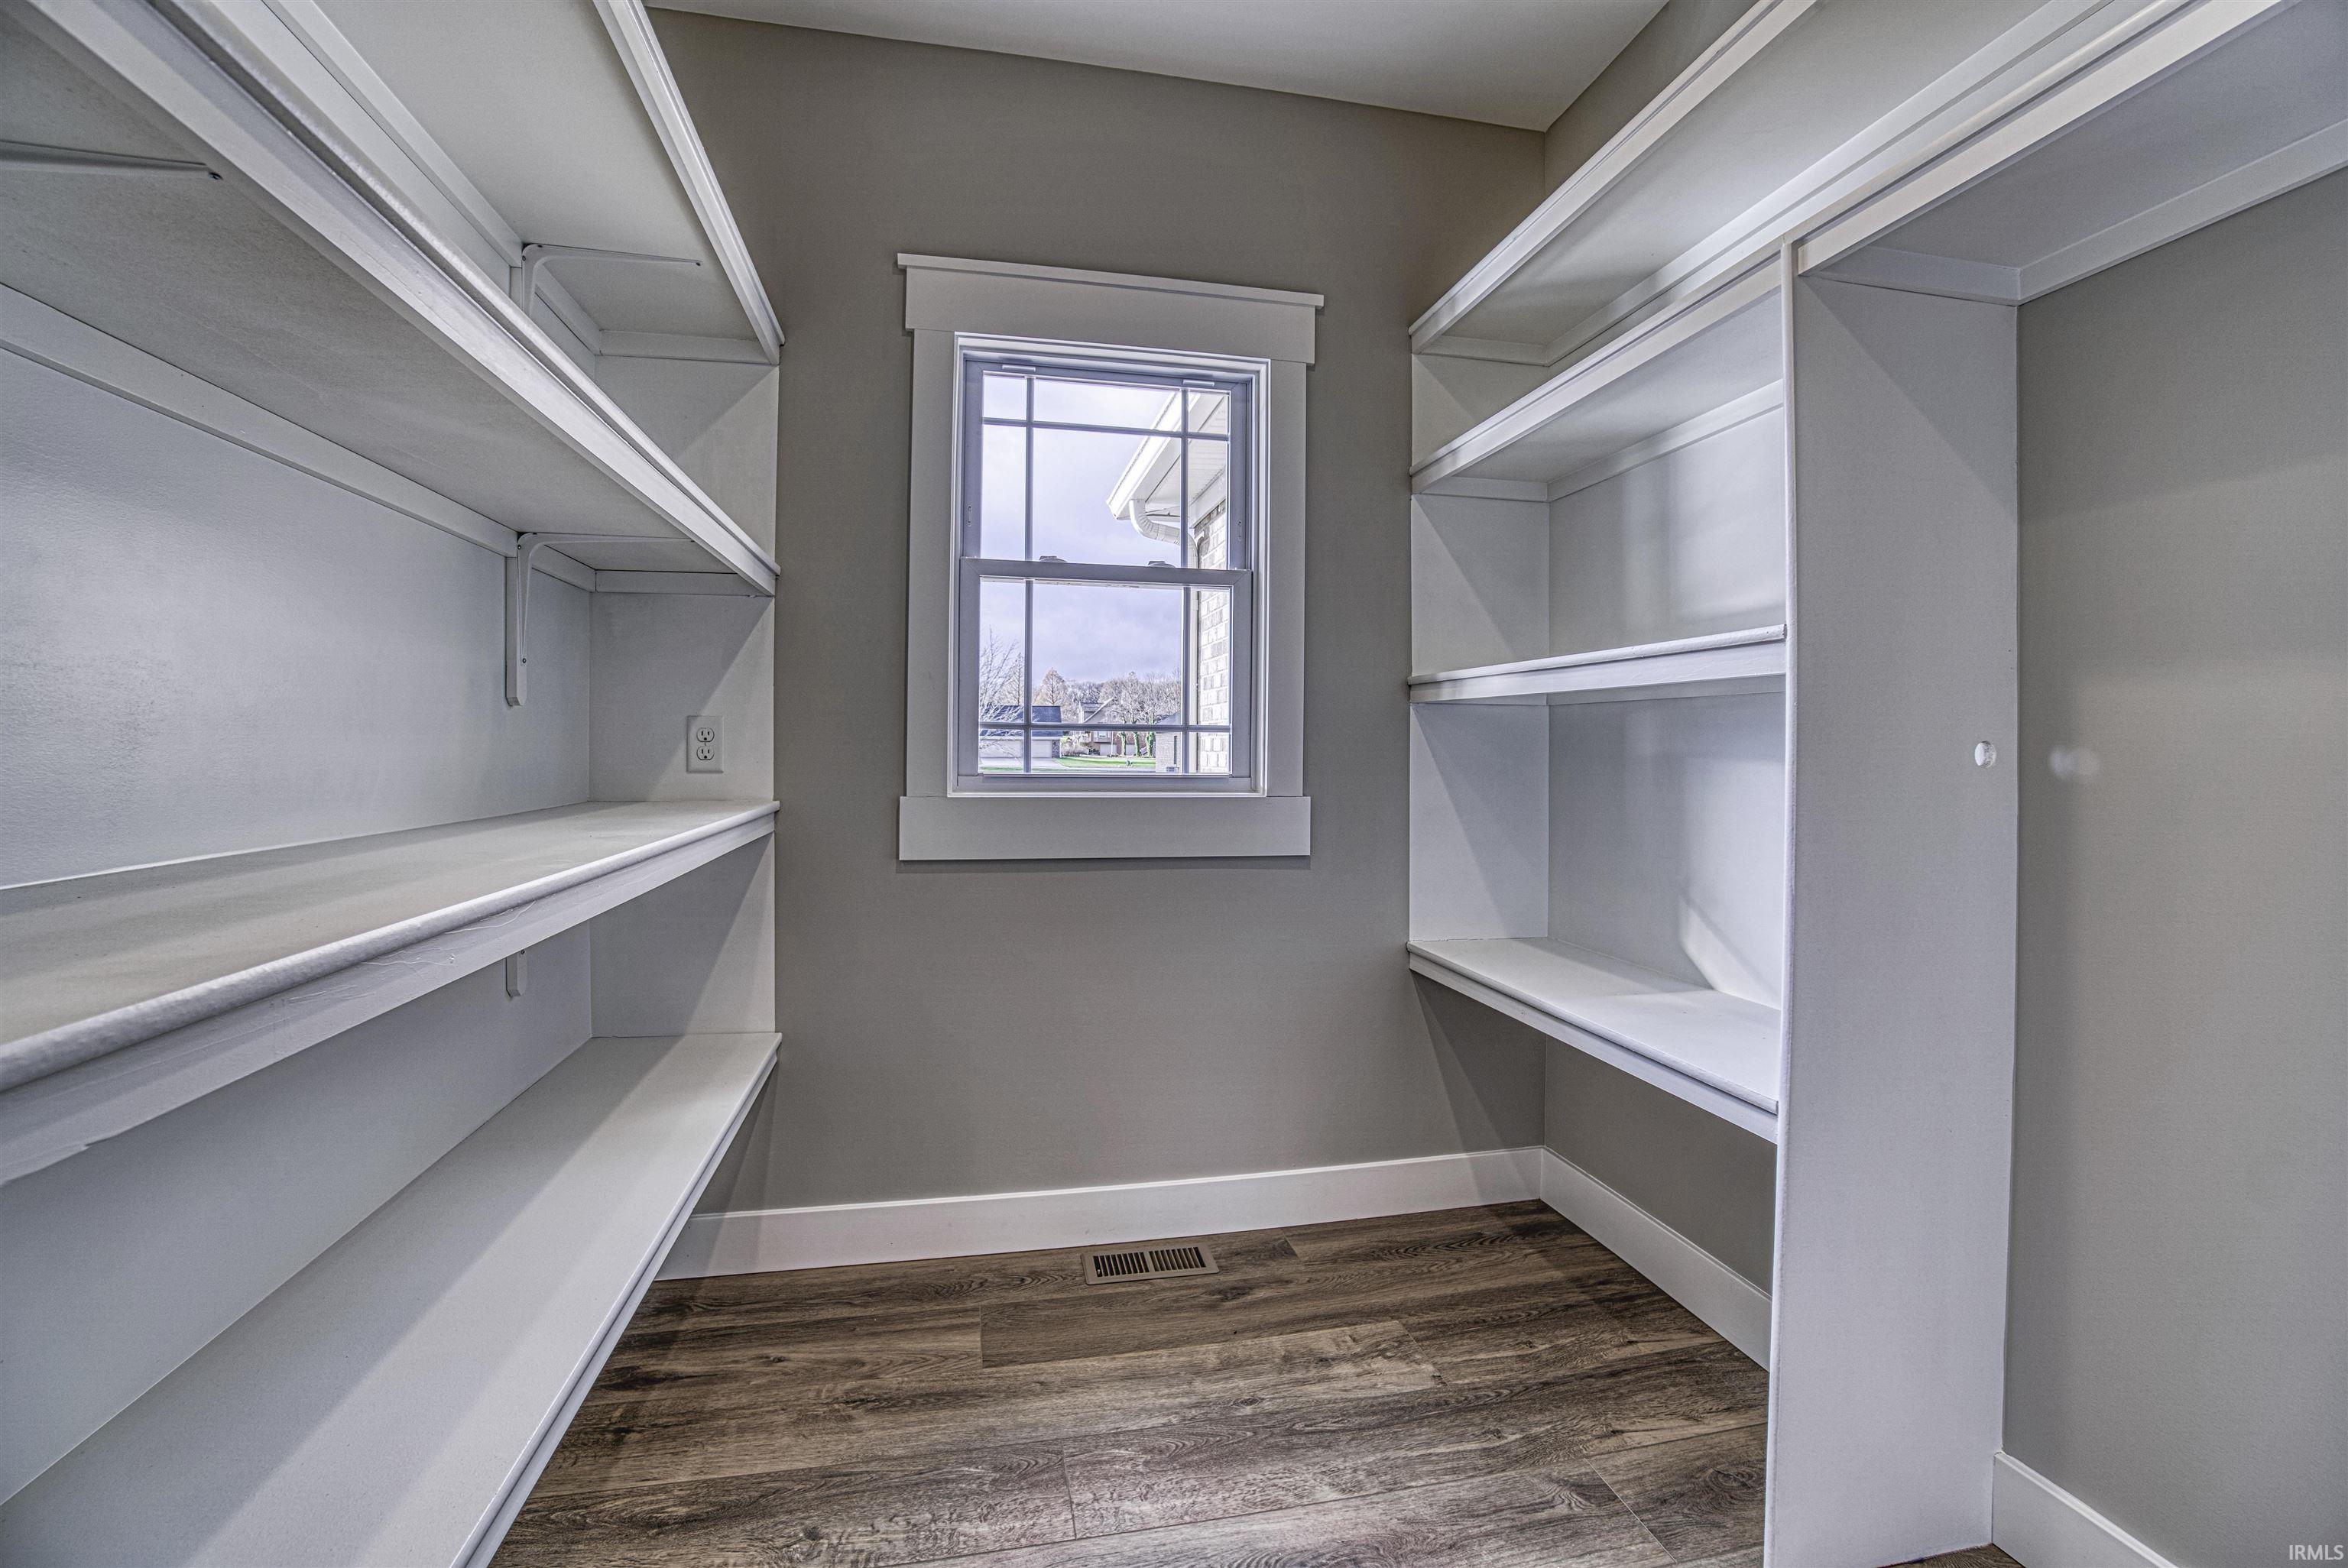 13x7 walk-in pantry with custom shelving and space for refrigerator